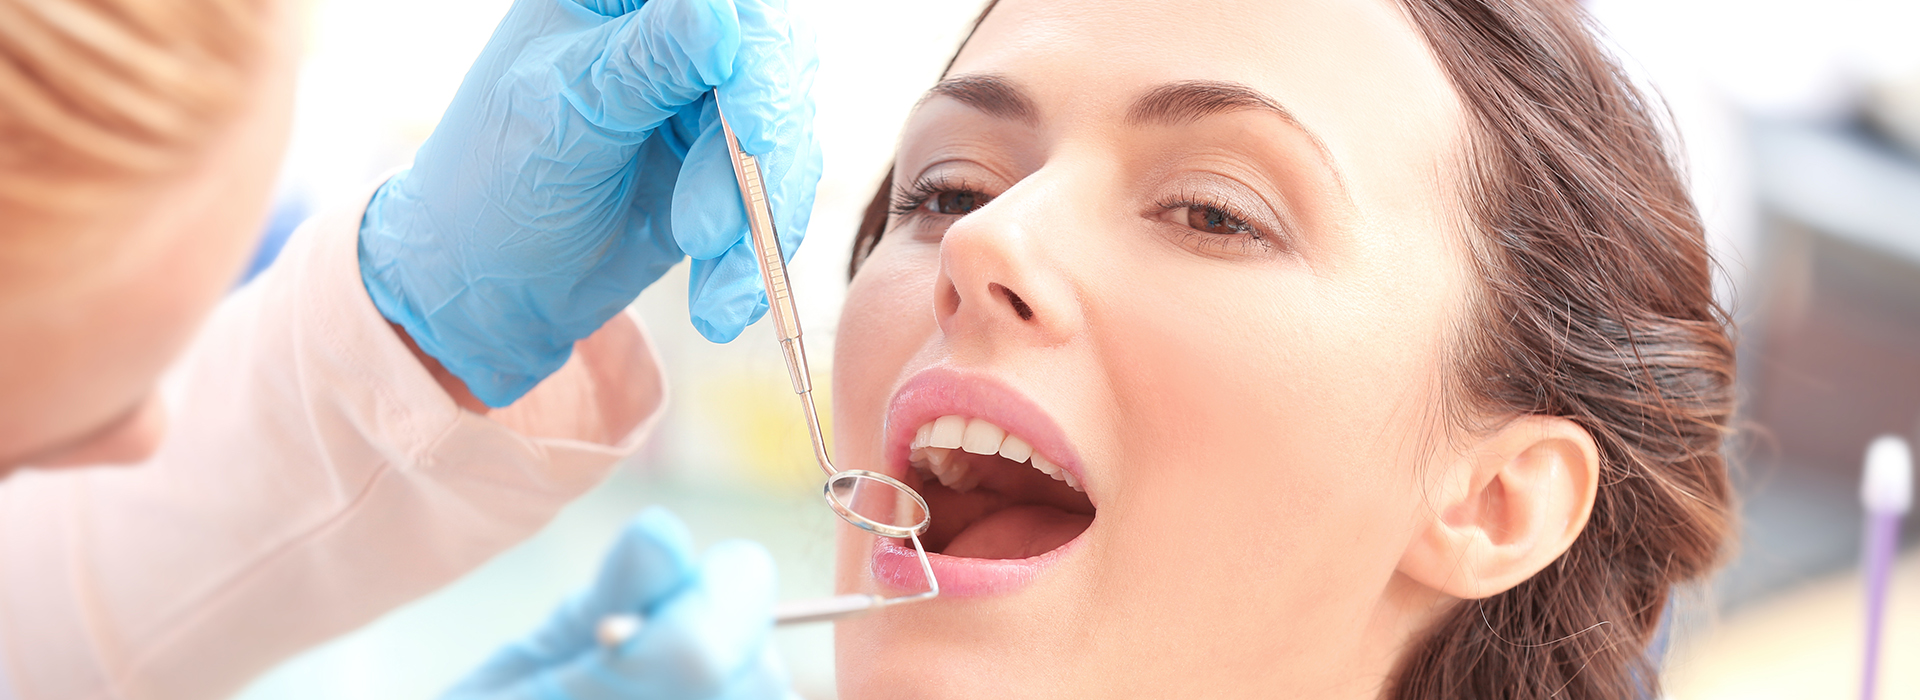 Cameron Park Dental Care | Cosmetic Dentistry, Fluoride Treatment and Root Canals